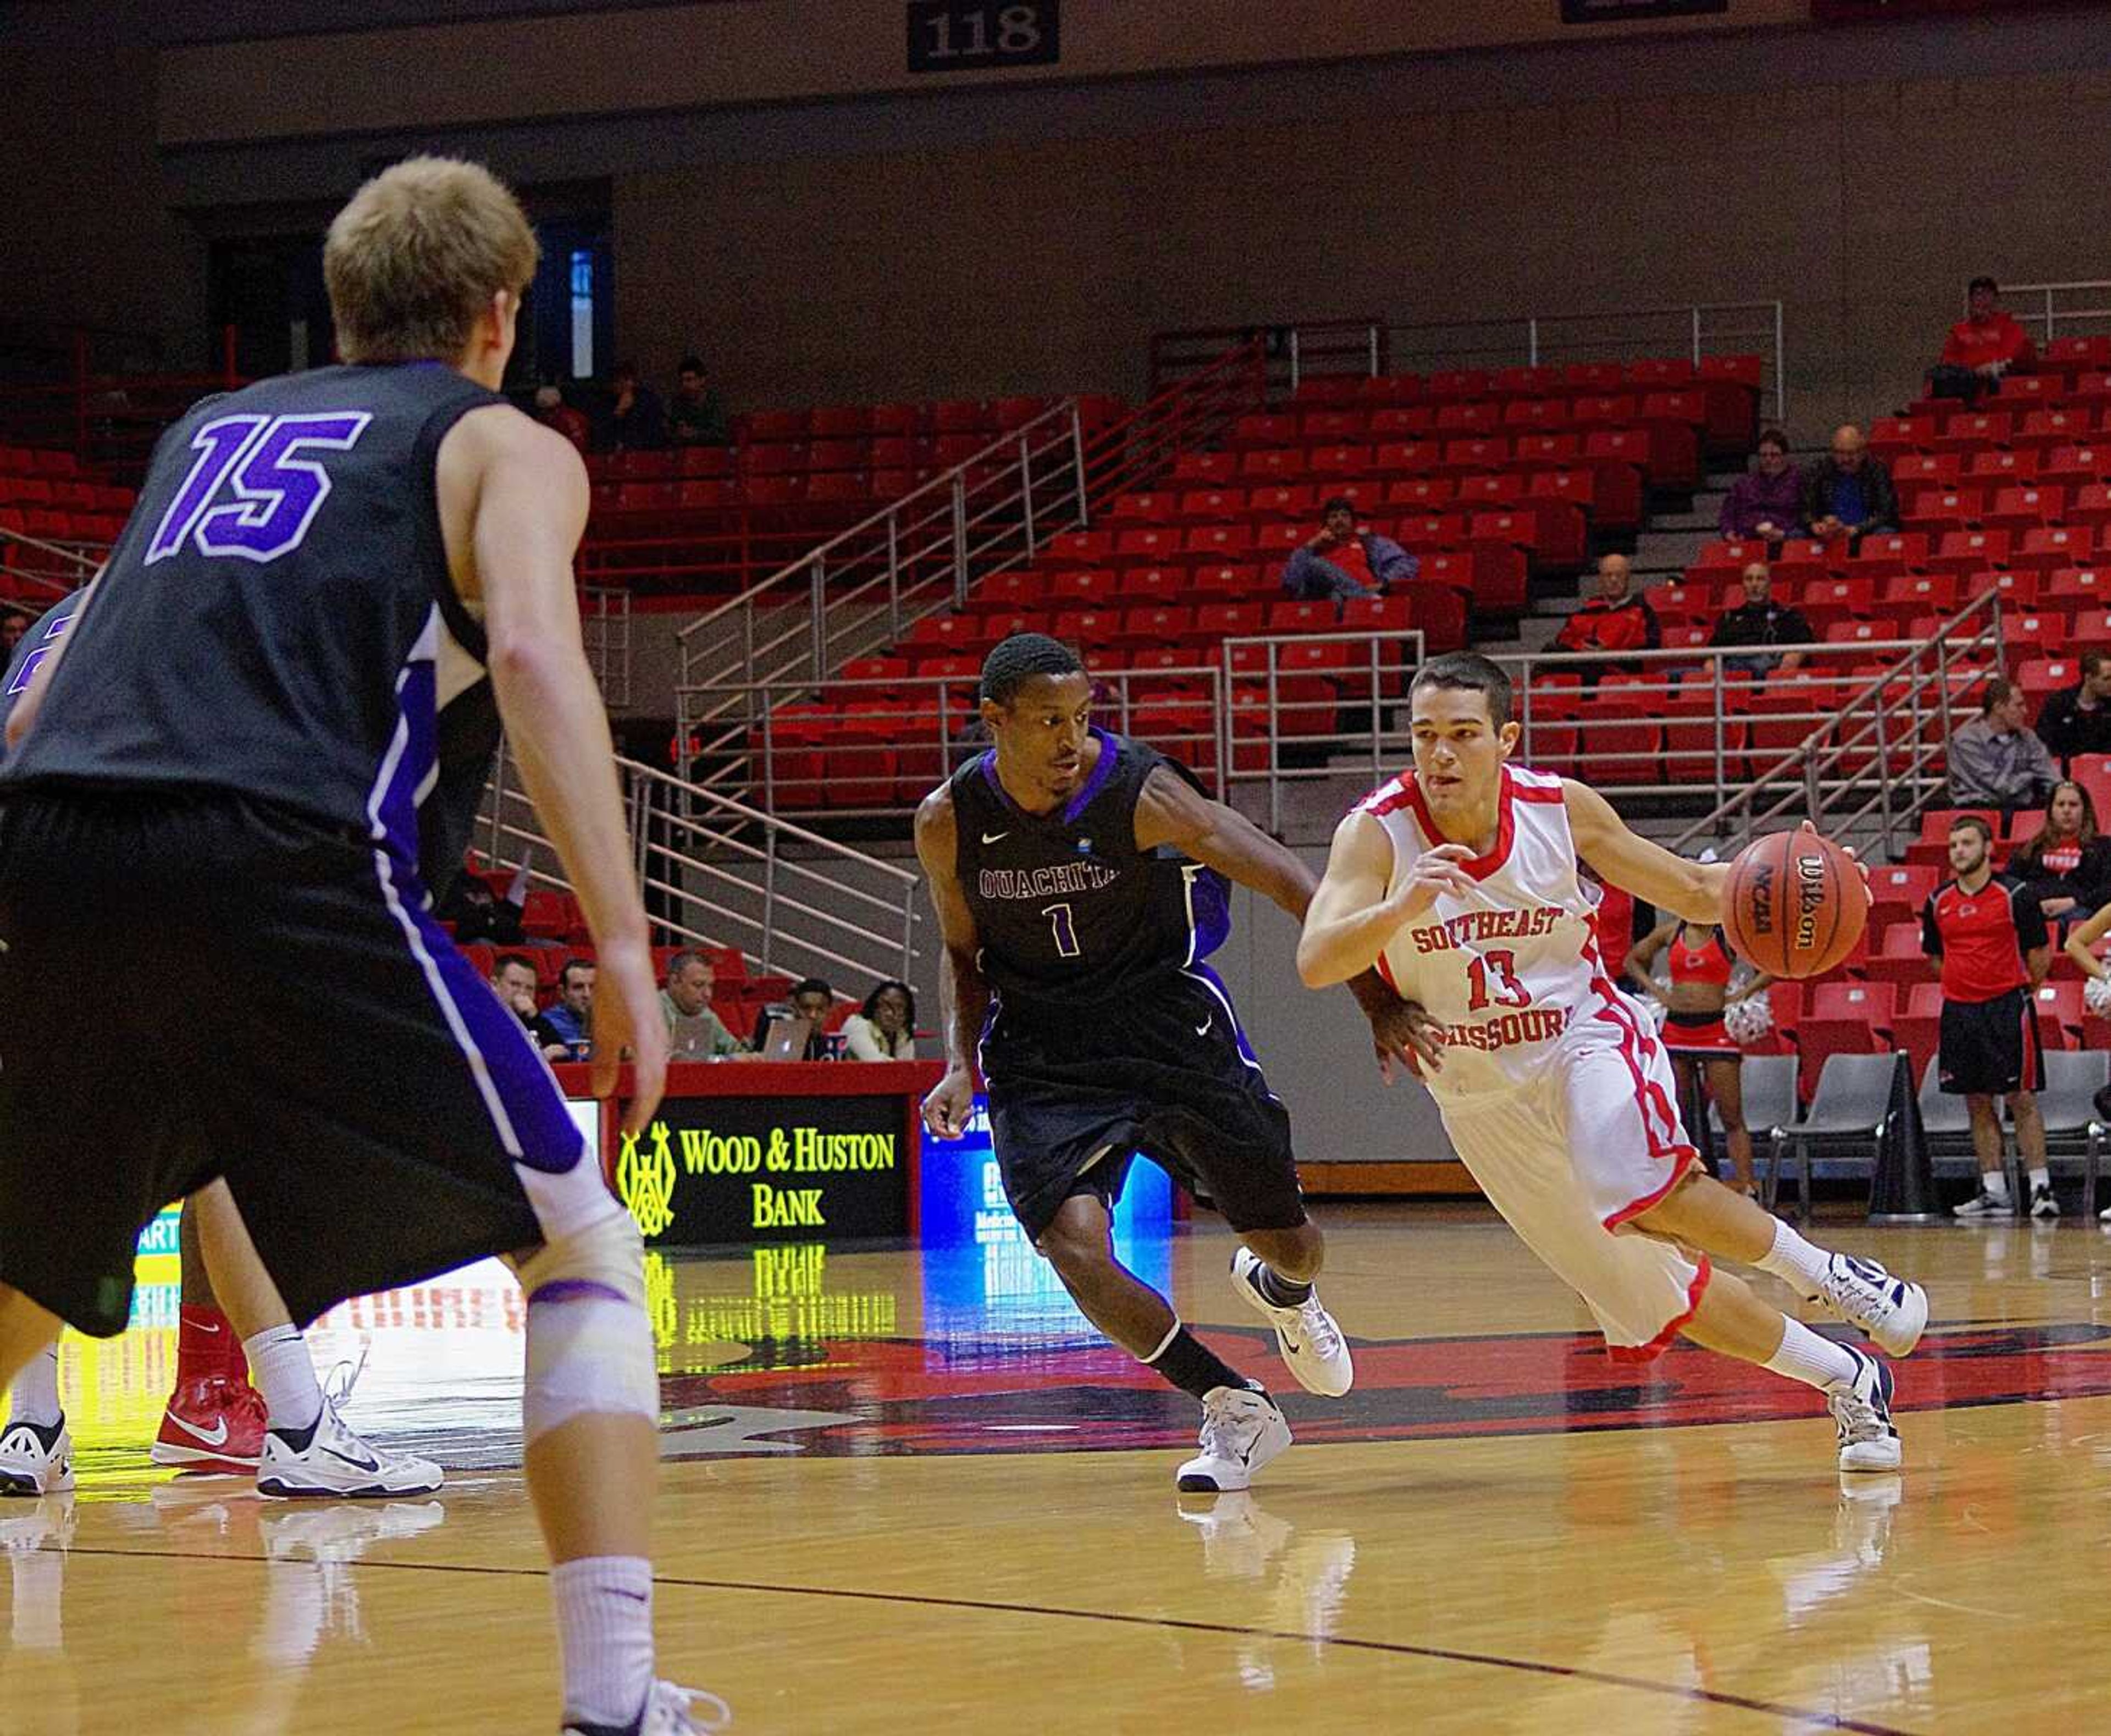 Southeast's guard Lucas Nutt drives around Ouachita Baptist's Micah Delph during the the first half of a game on Oct. 30 at the Show Me Center. Photo by Nathan Hamilton